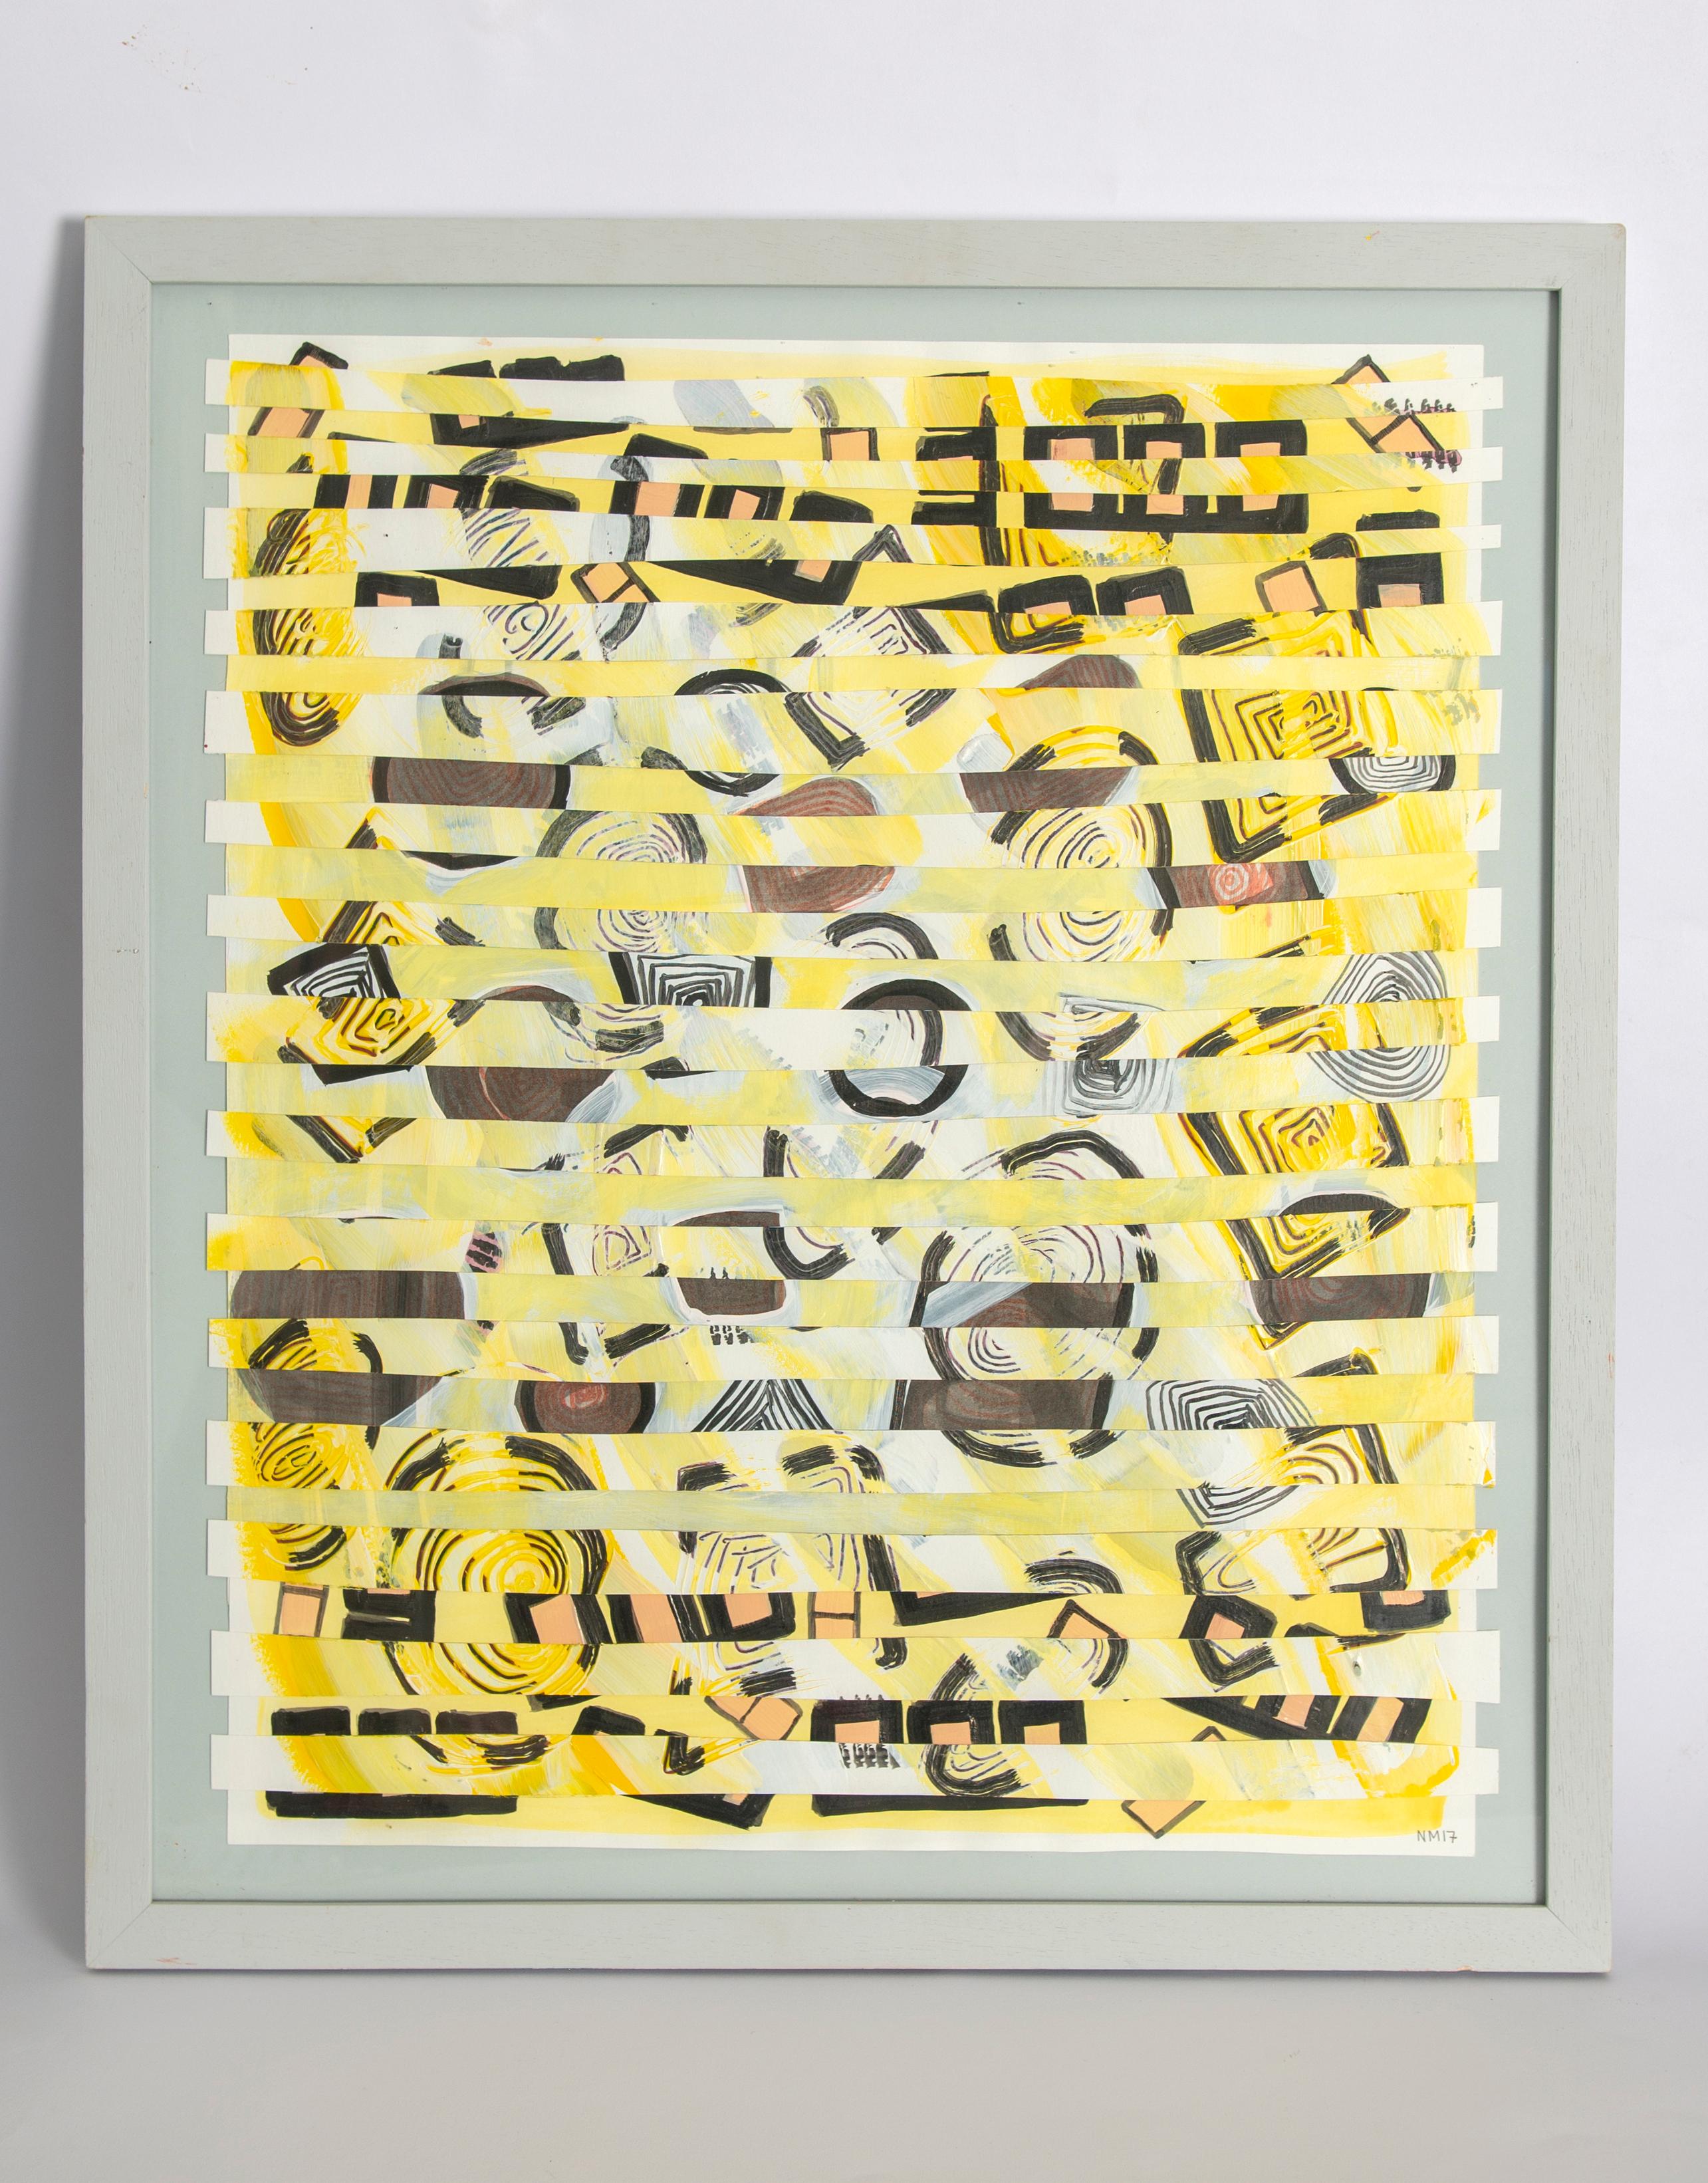 Nicky Marais  Abstract Painting - Yellow Grid, Nicky Marais, Acrylic on paper, collage, grid, abstract